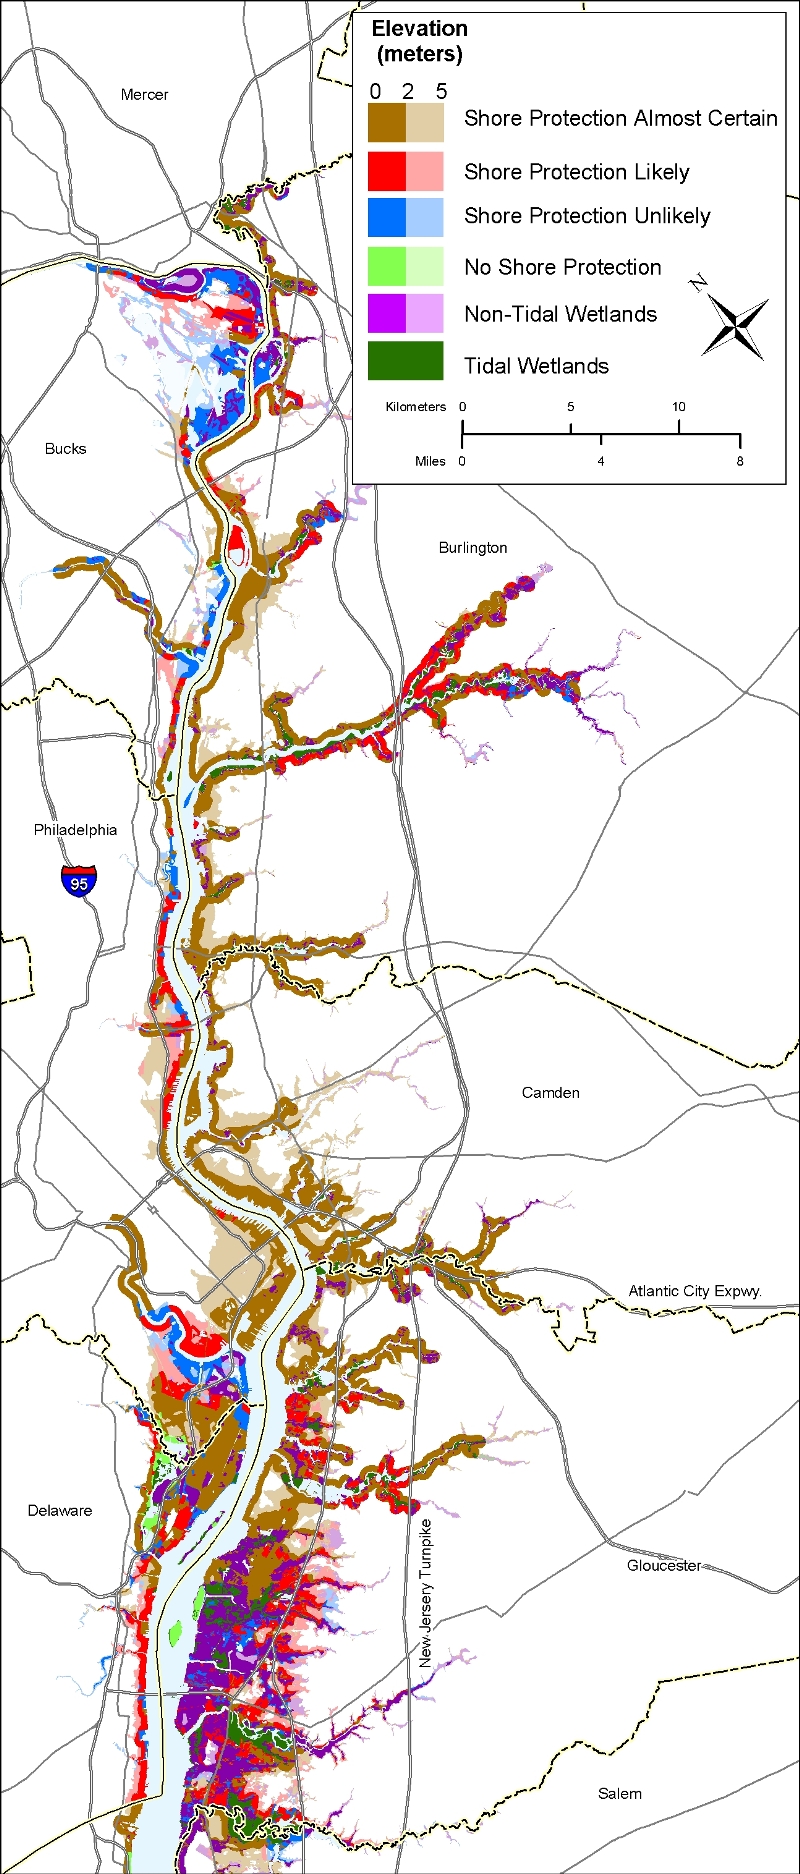 Delaware River sea level rise planning map